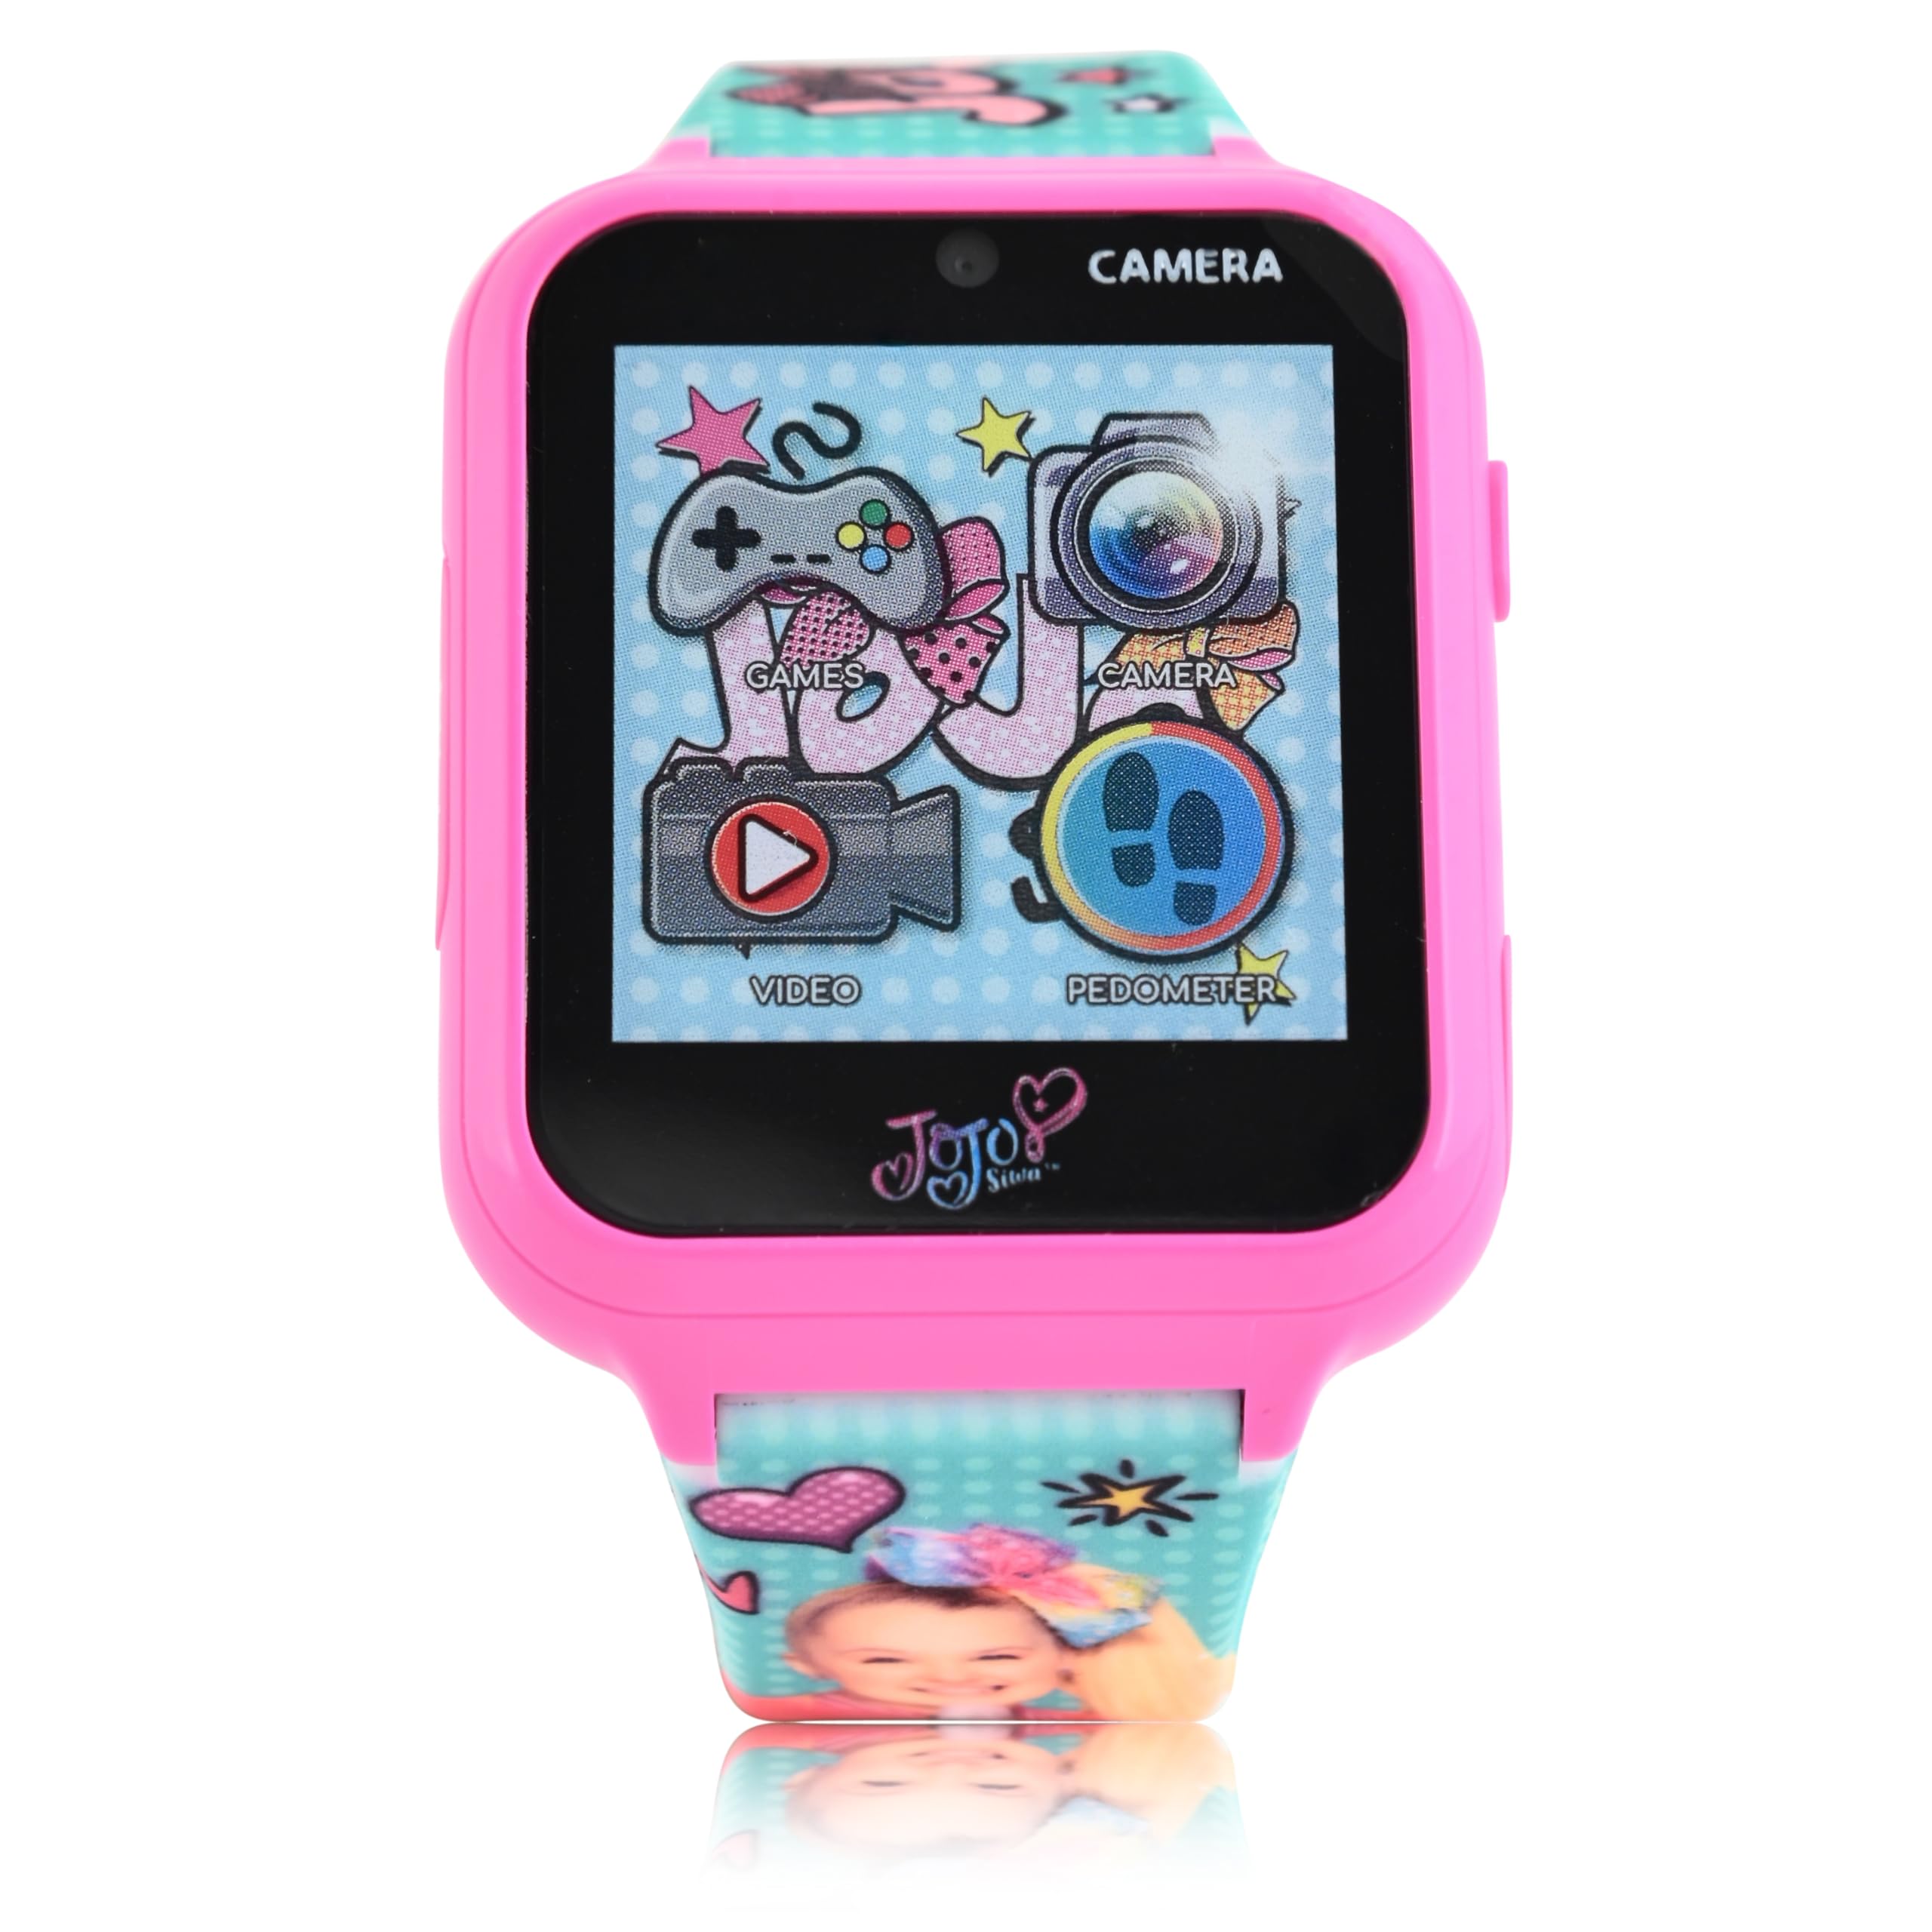 Accutime JoJo Siwa Nickelodeon Educational Learning Smart Watch Toy for Girls with Matching Green and Pink Headphones (Model: JOJ40159AZ)